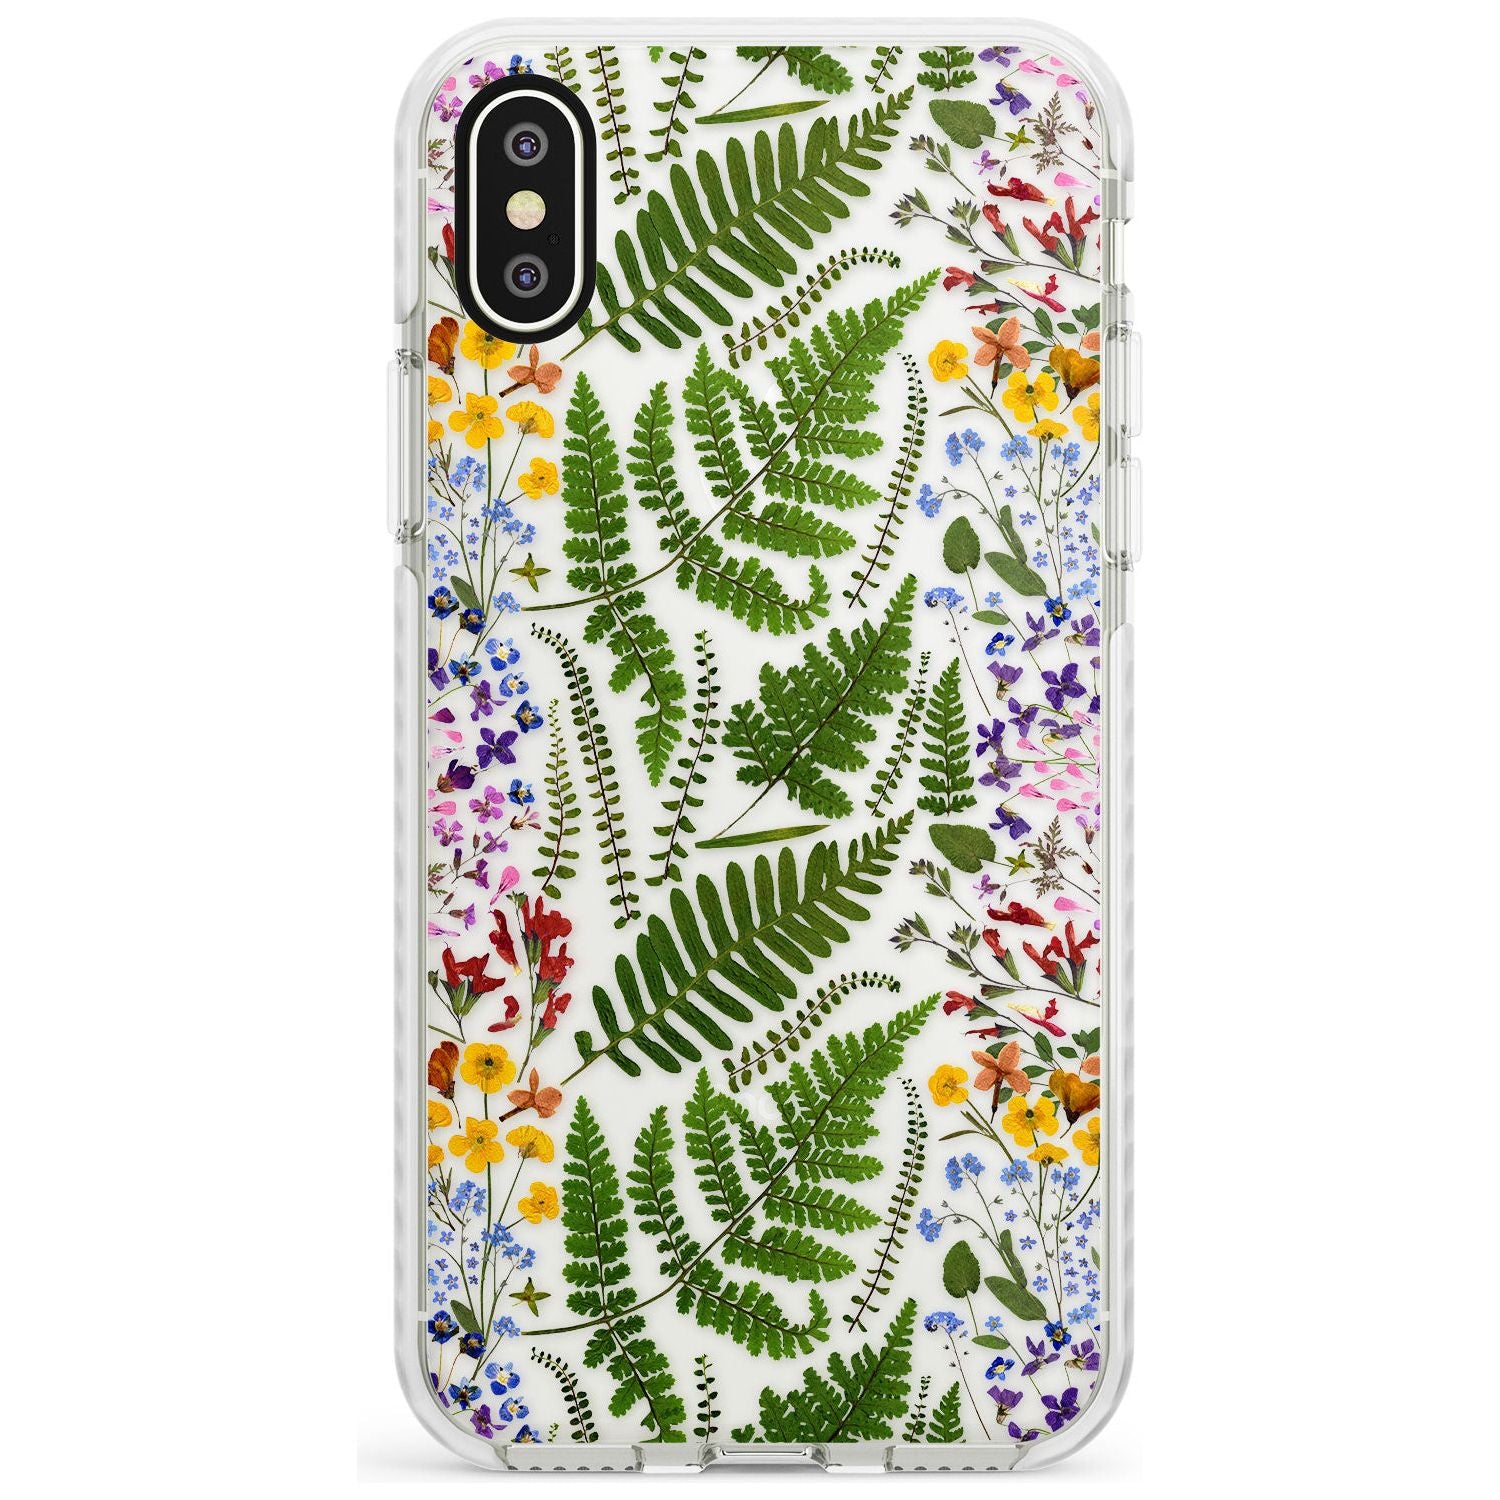 Busy Floral and Fern Design Impact Phone Case for iPhone X XS Max XR